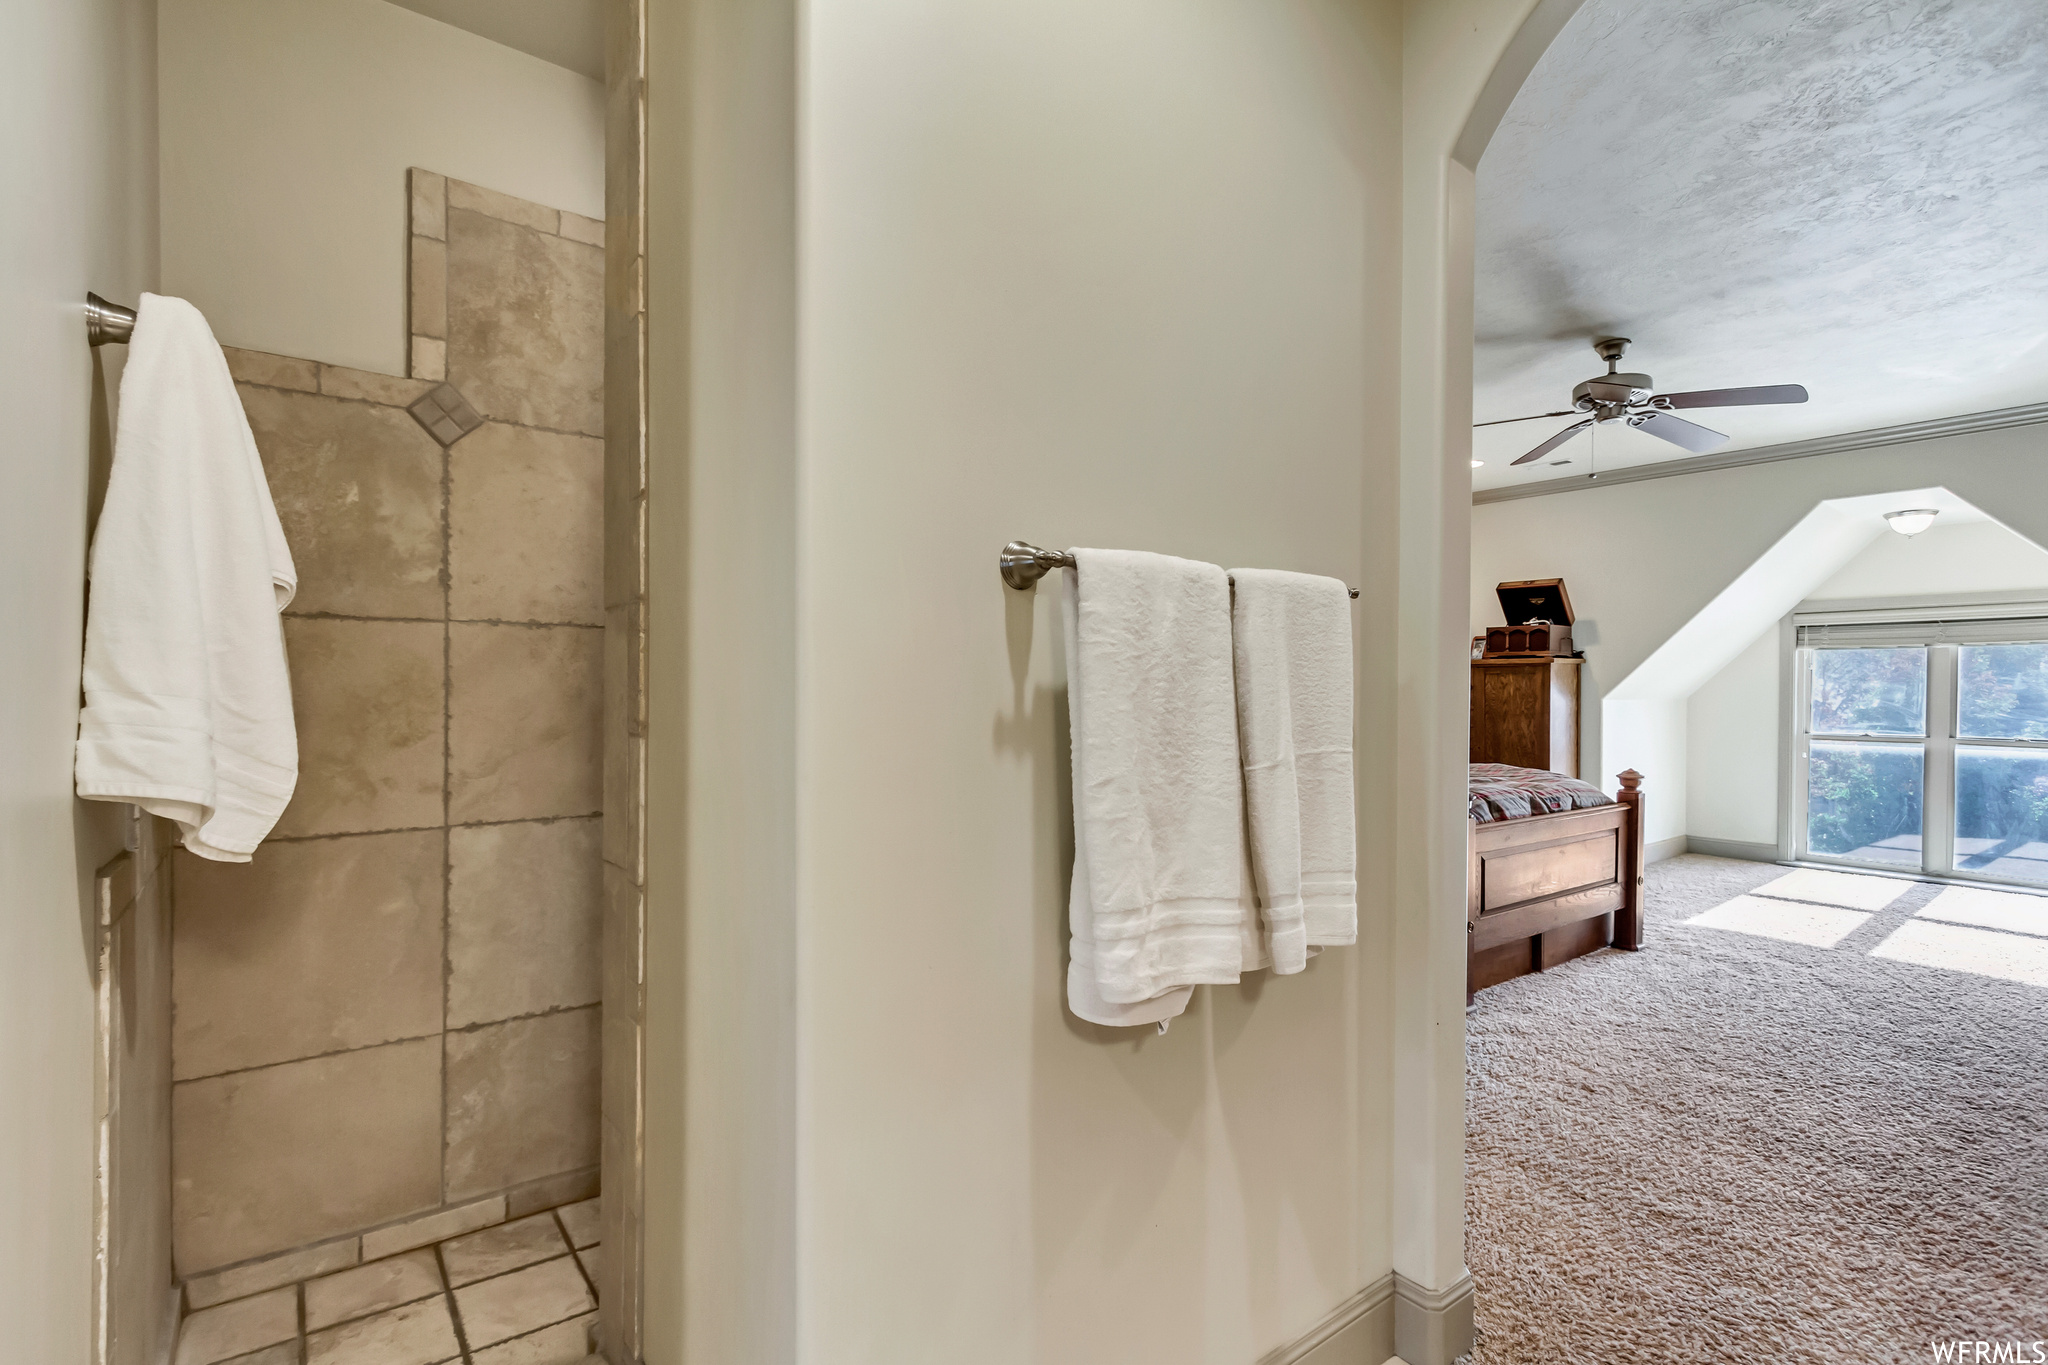 Bathroom featuring crown molding, ceiling fan, and a textured ceiling